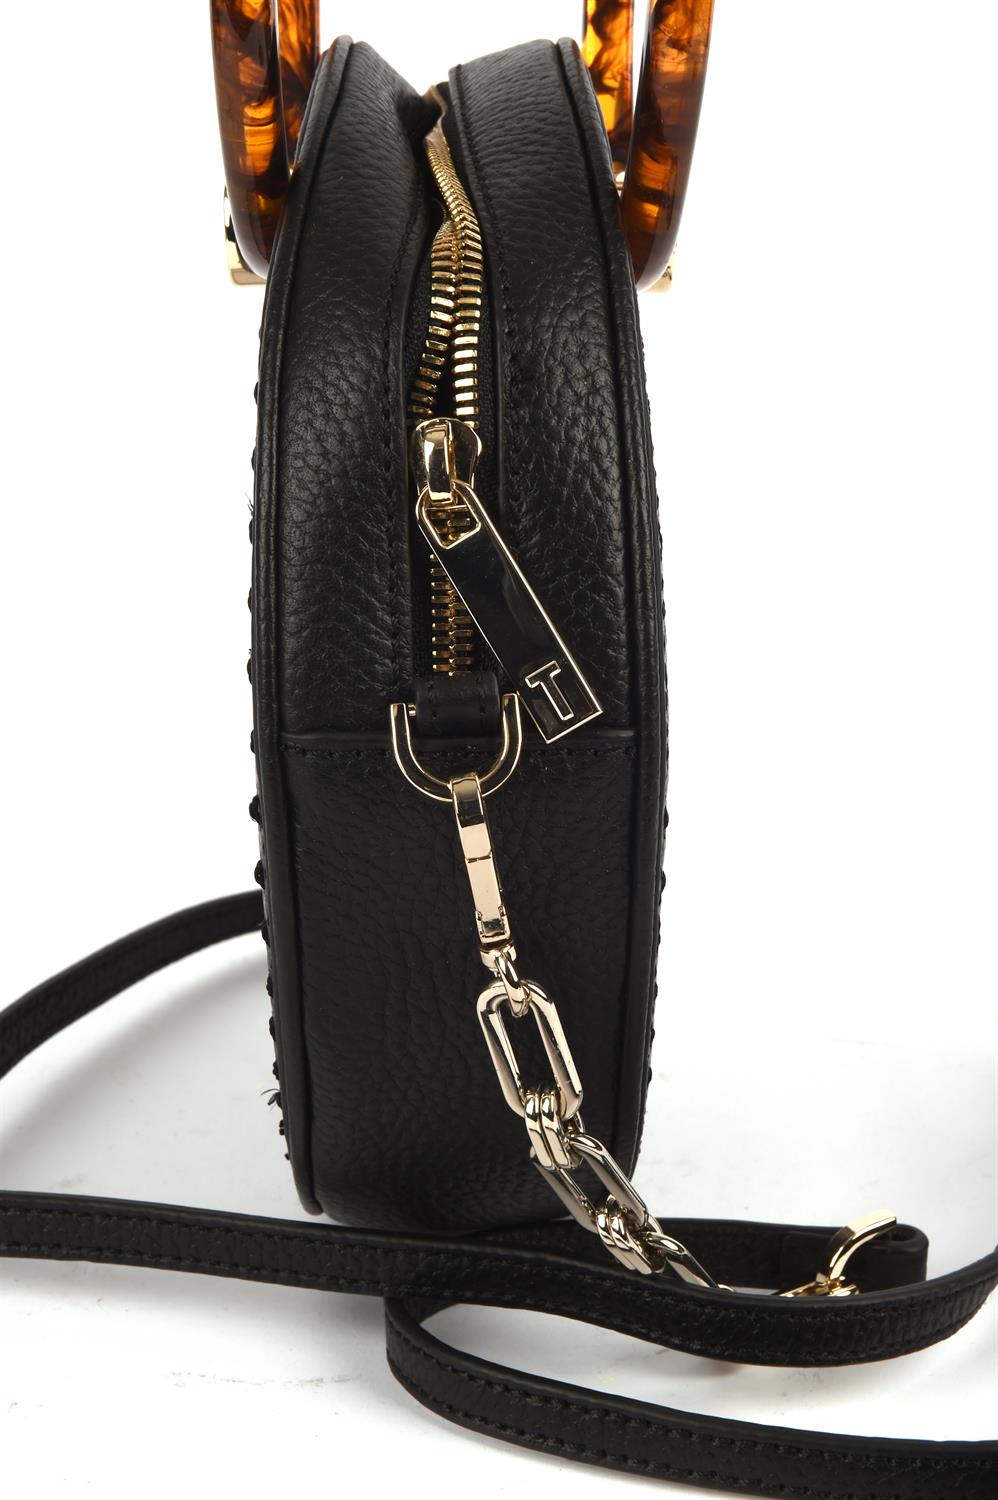 TED BAKER round black grained leather cross body handbag with brown Perspex tortoiseshell coloured - Image 4 of 5